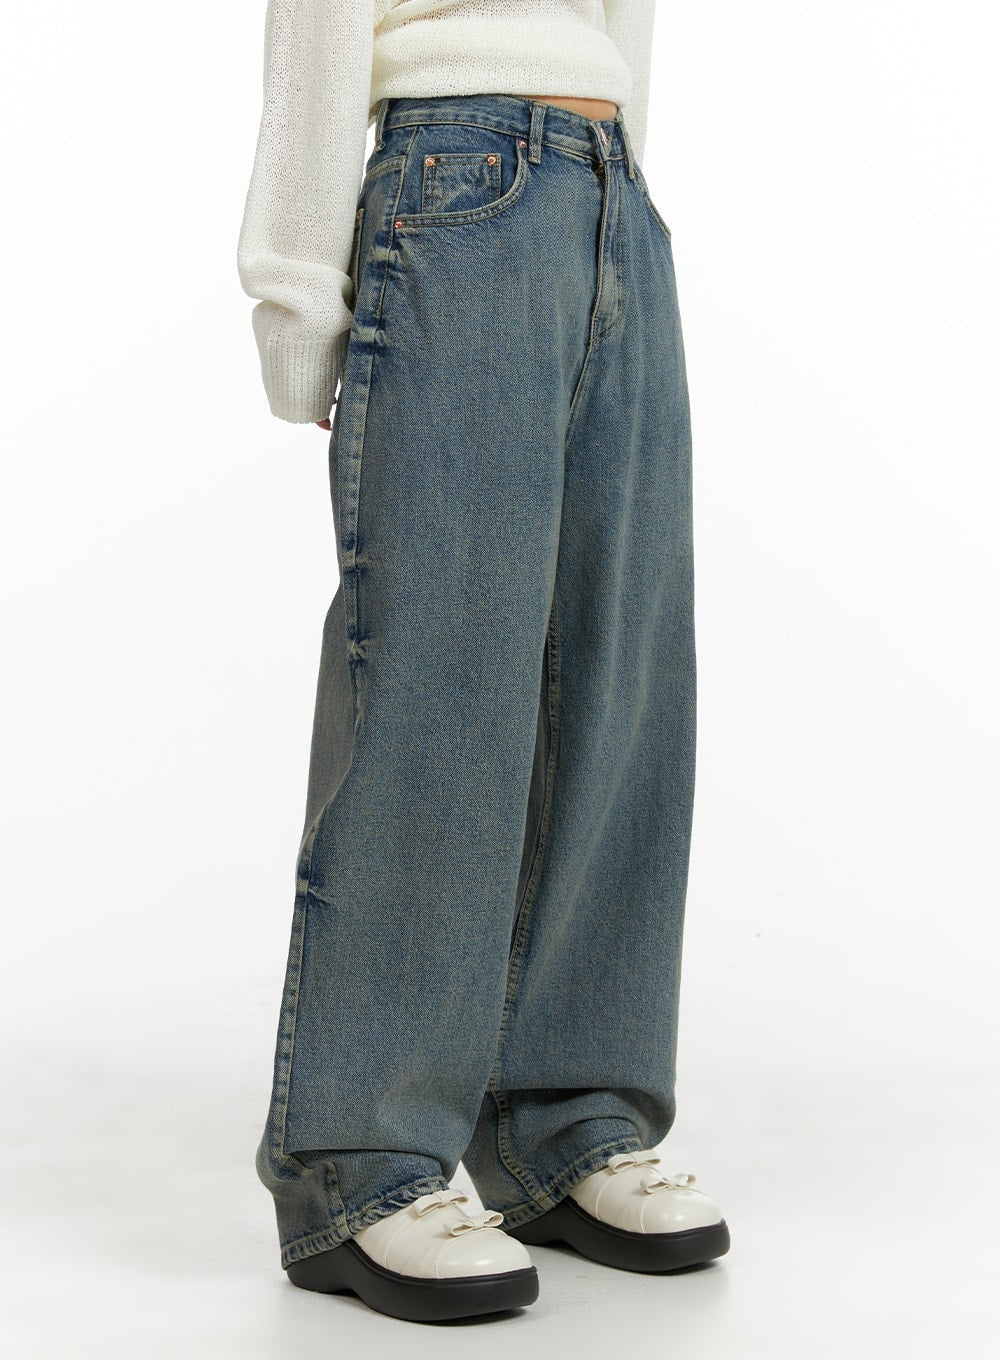 Urban Chic Washed Baggy Jeans CM411 - Acubi style | LEWKIN